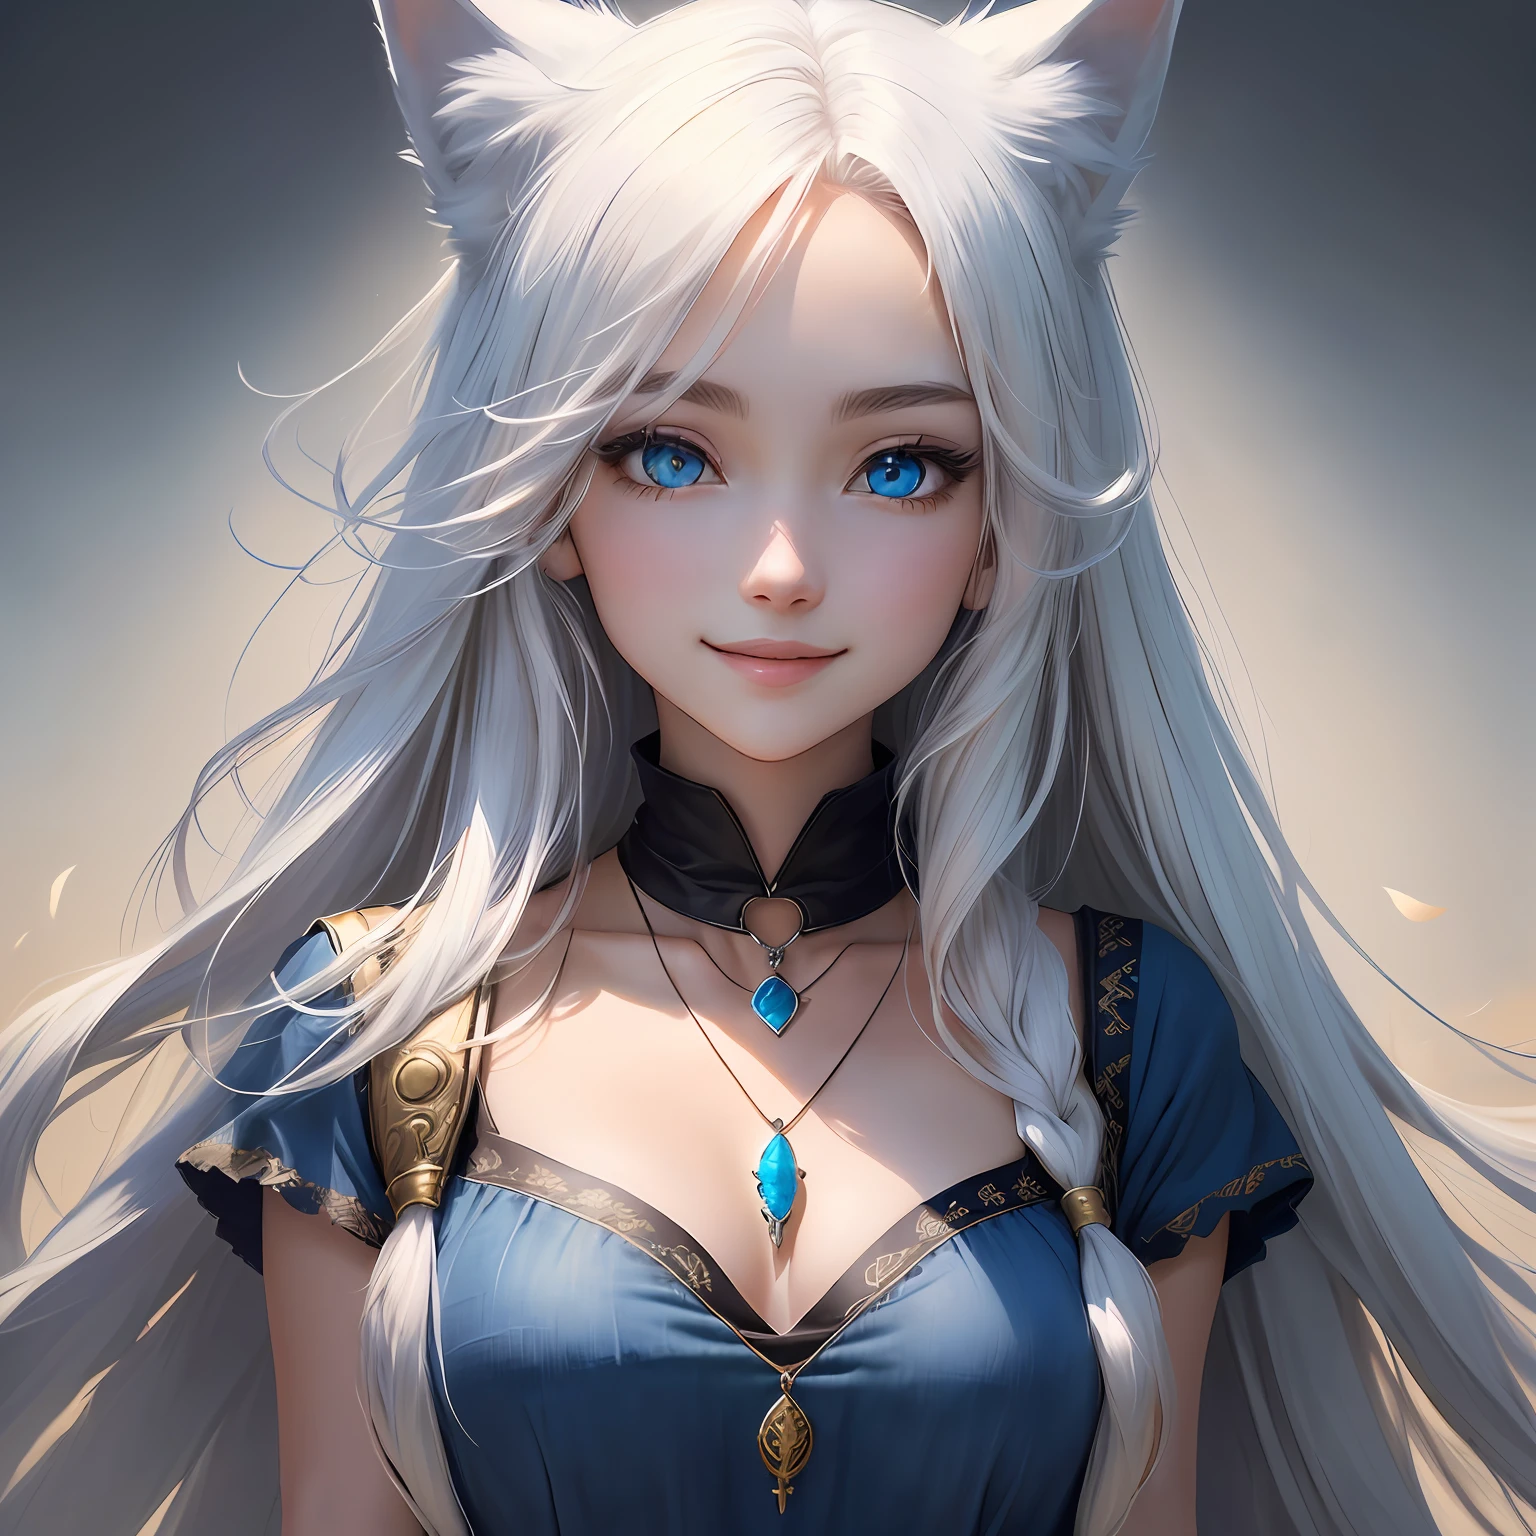 White wolf ears, a brown anime girl with white long hair, blue eyes, little smile, bell necklace around the neck, used to make avatar